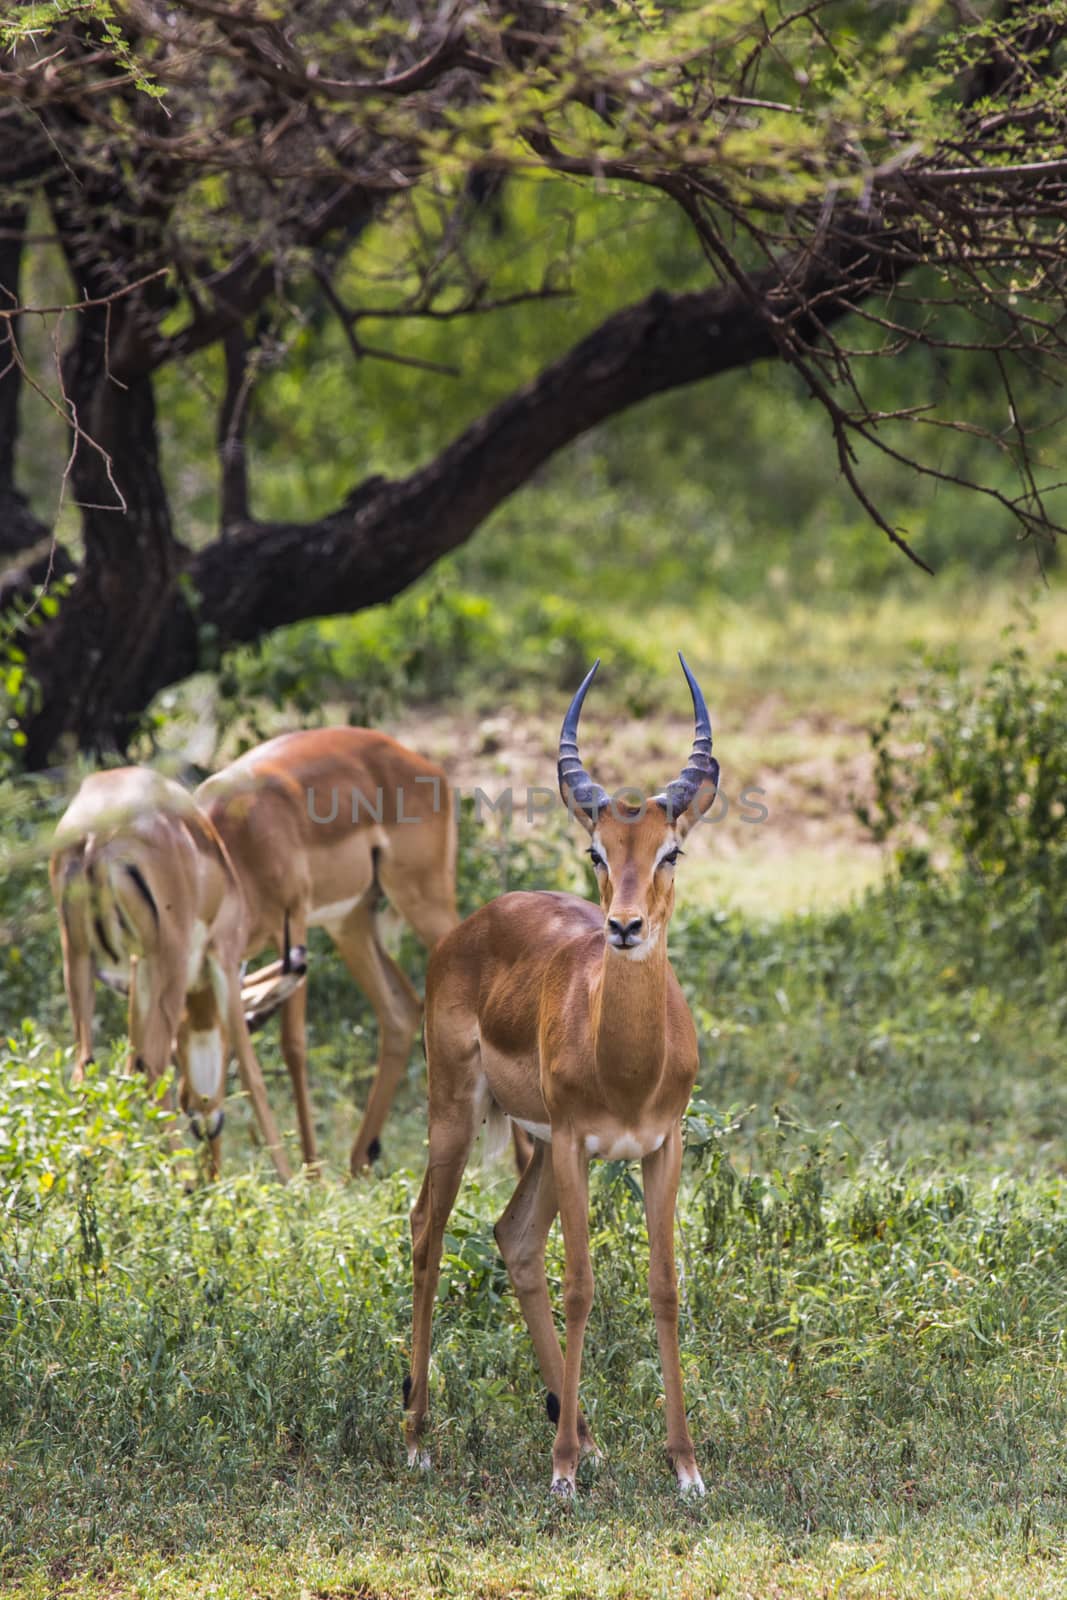 A herd of male impala, Aepyceros melampus, standing in the vegetation in Serengeti National Park, Tanzania